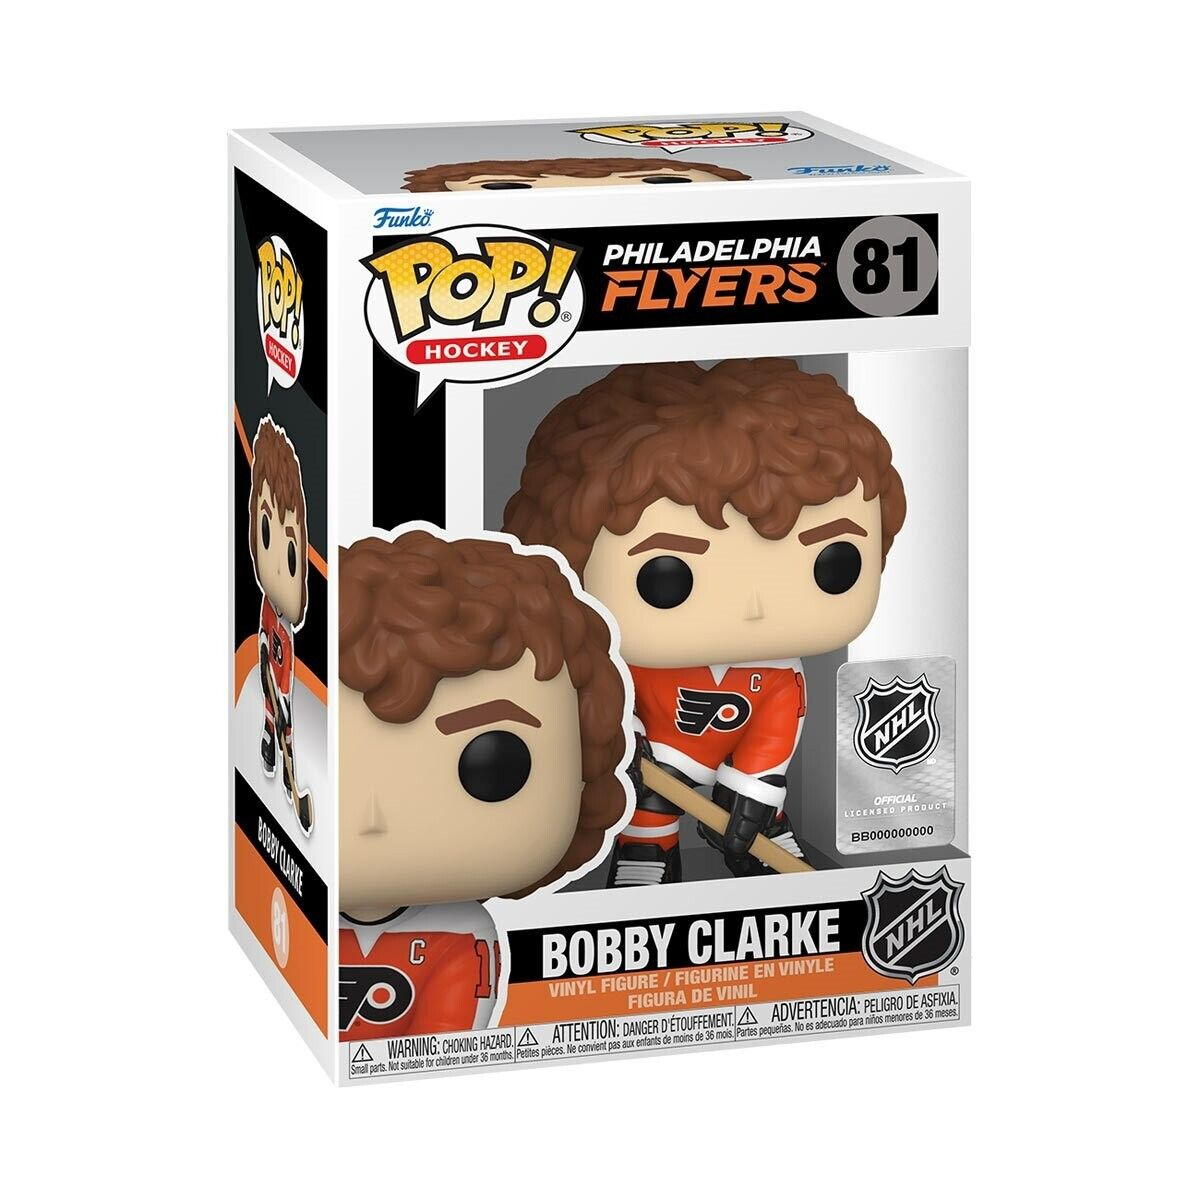 Bobby Clarke NHL Jerseys, Apparel and Collectibles